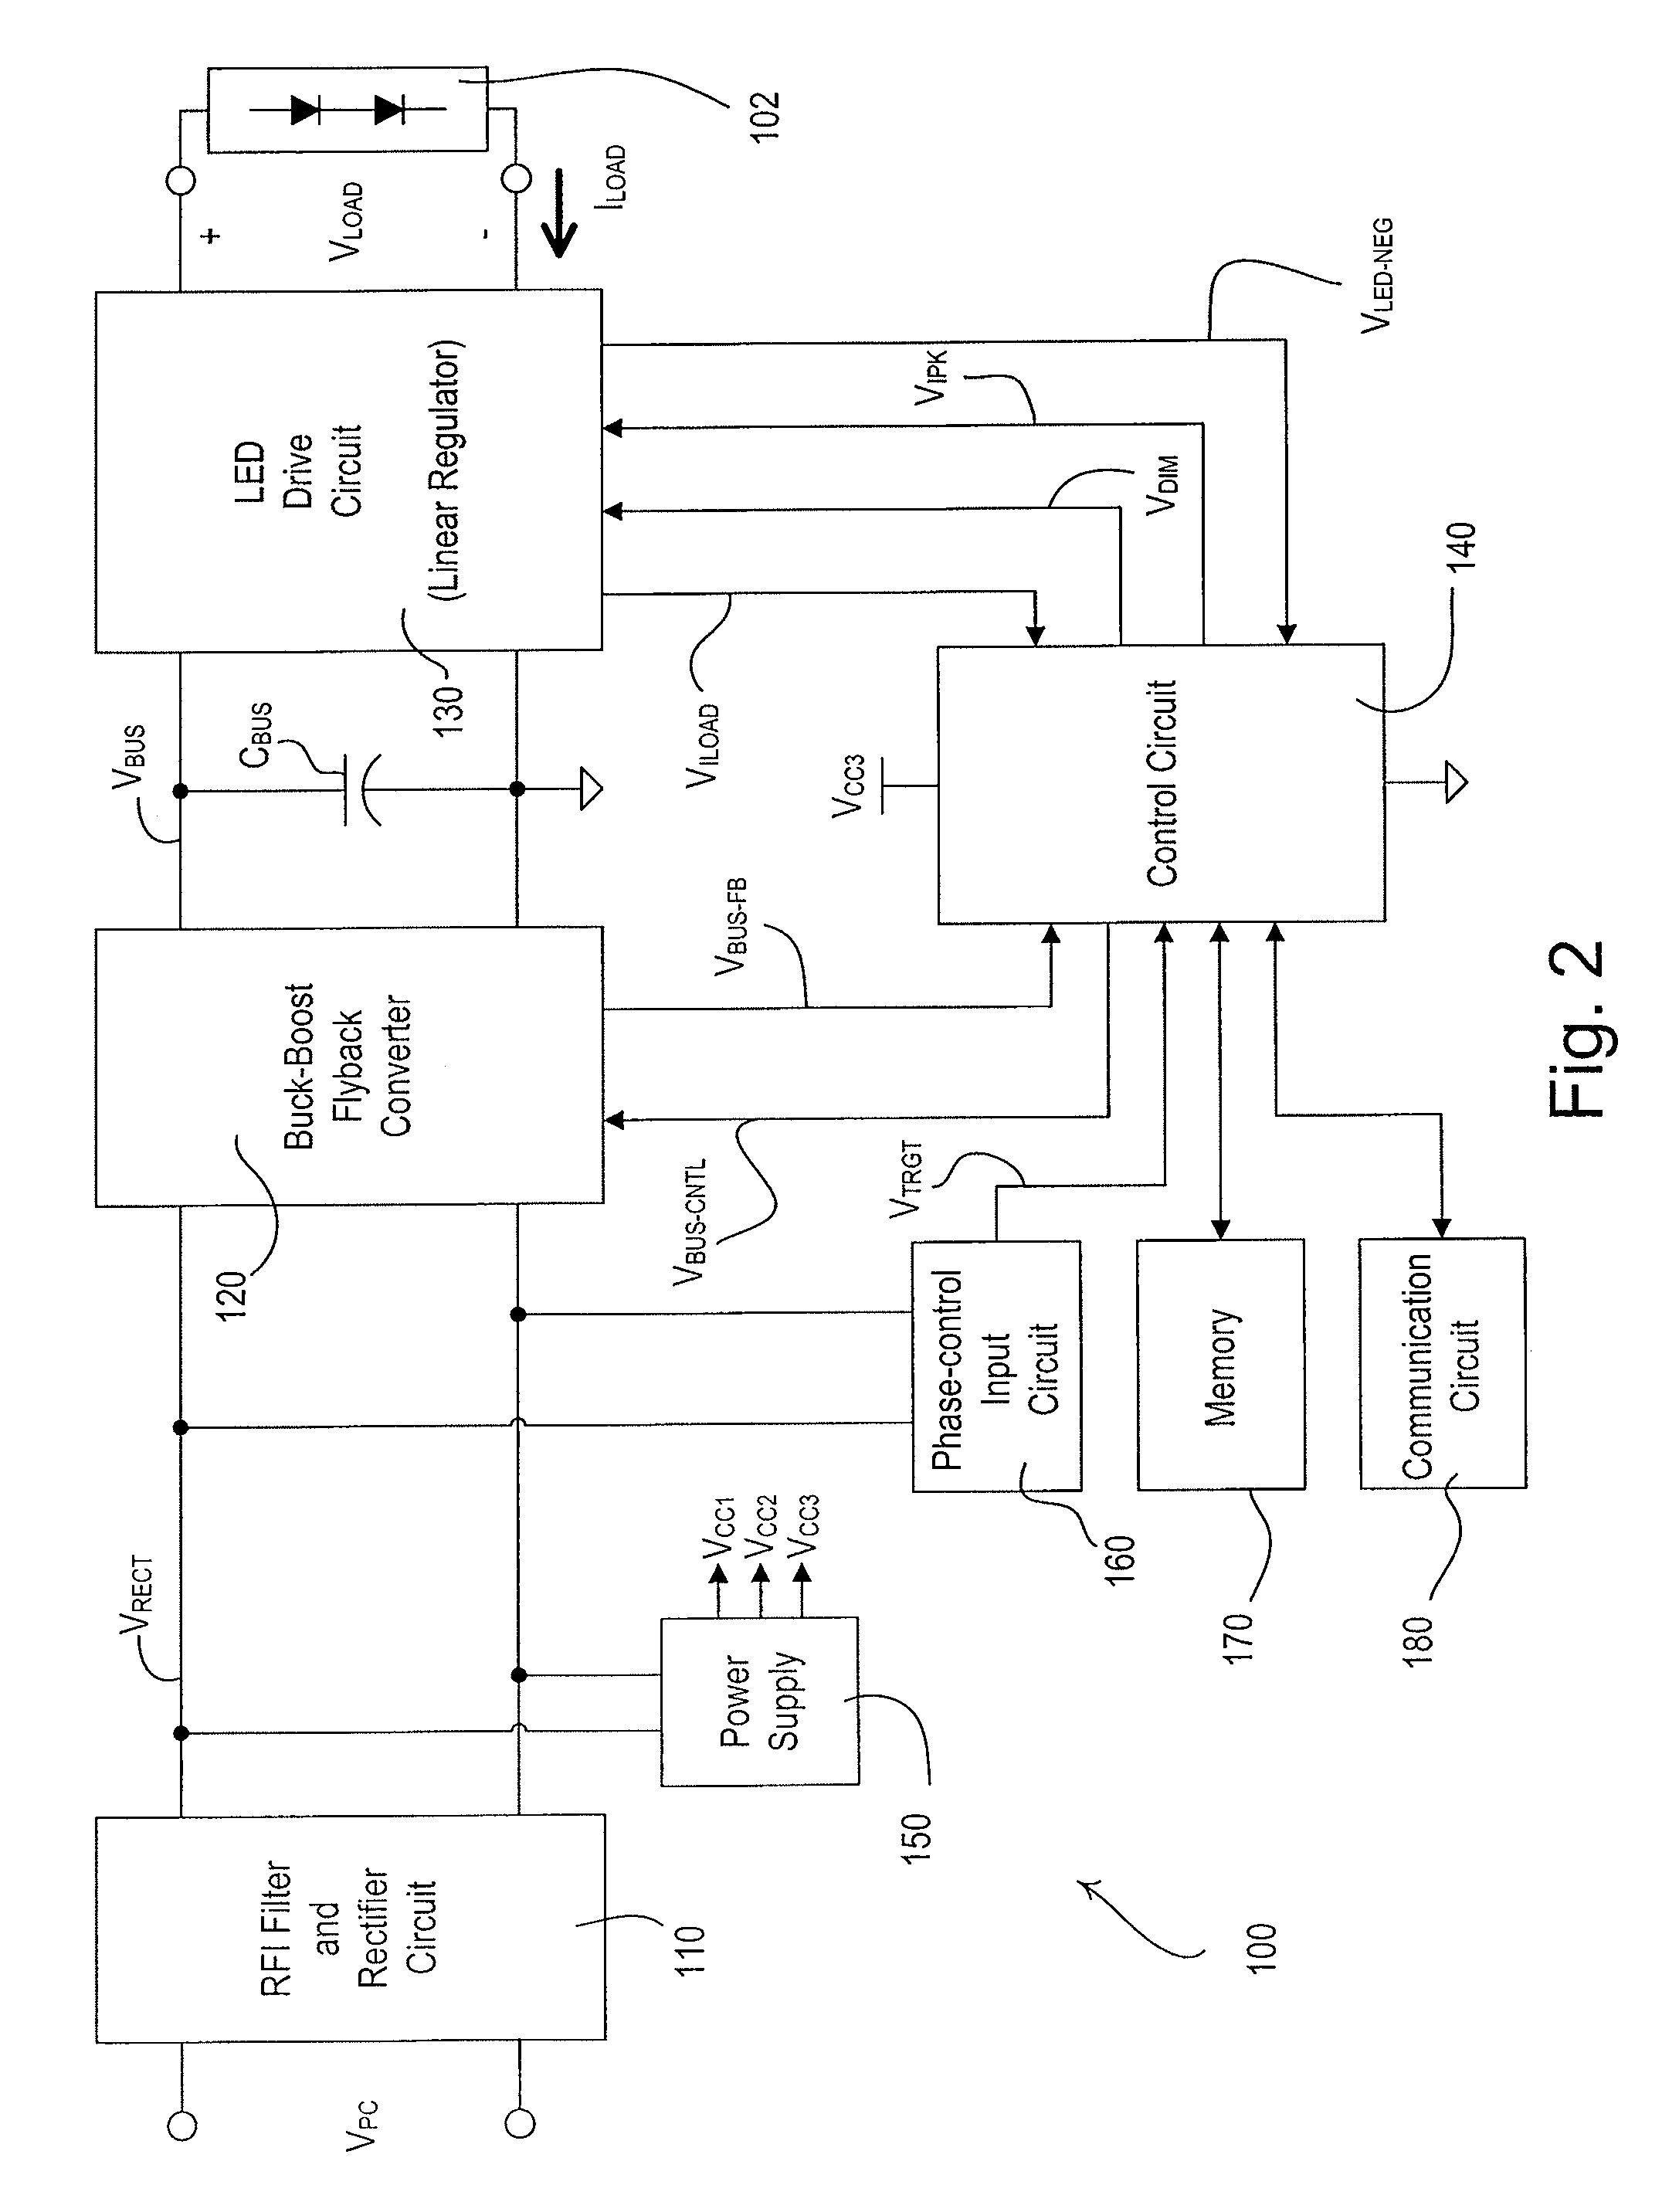 Power converter for a configurable light-emitting diode driver